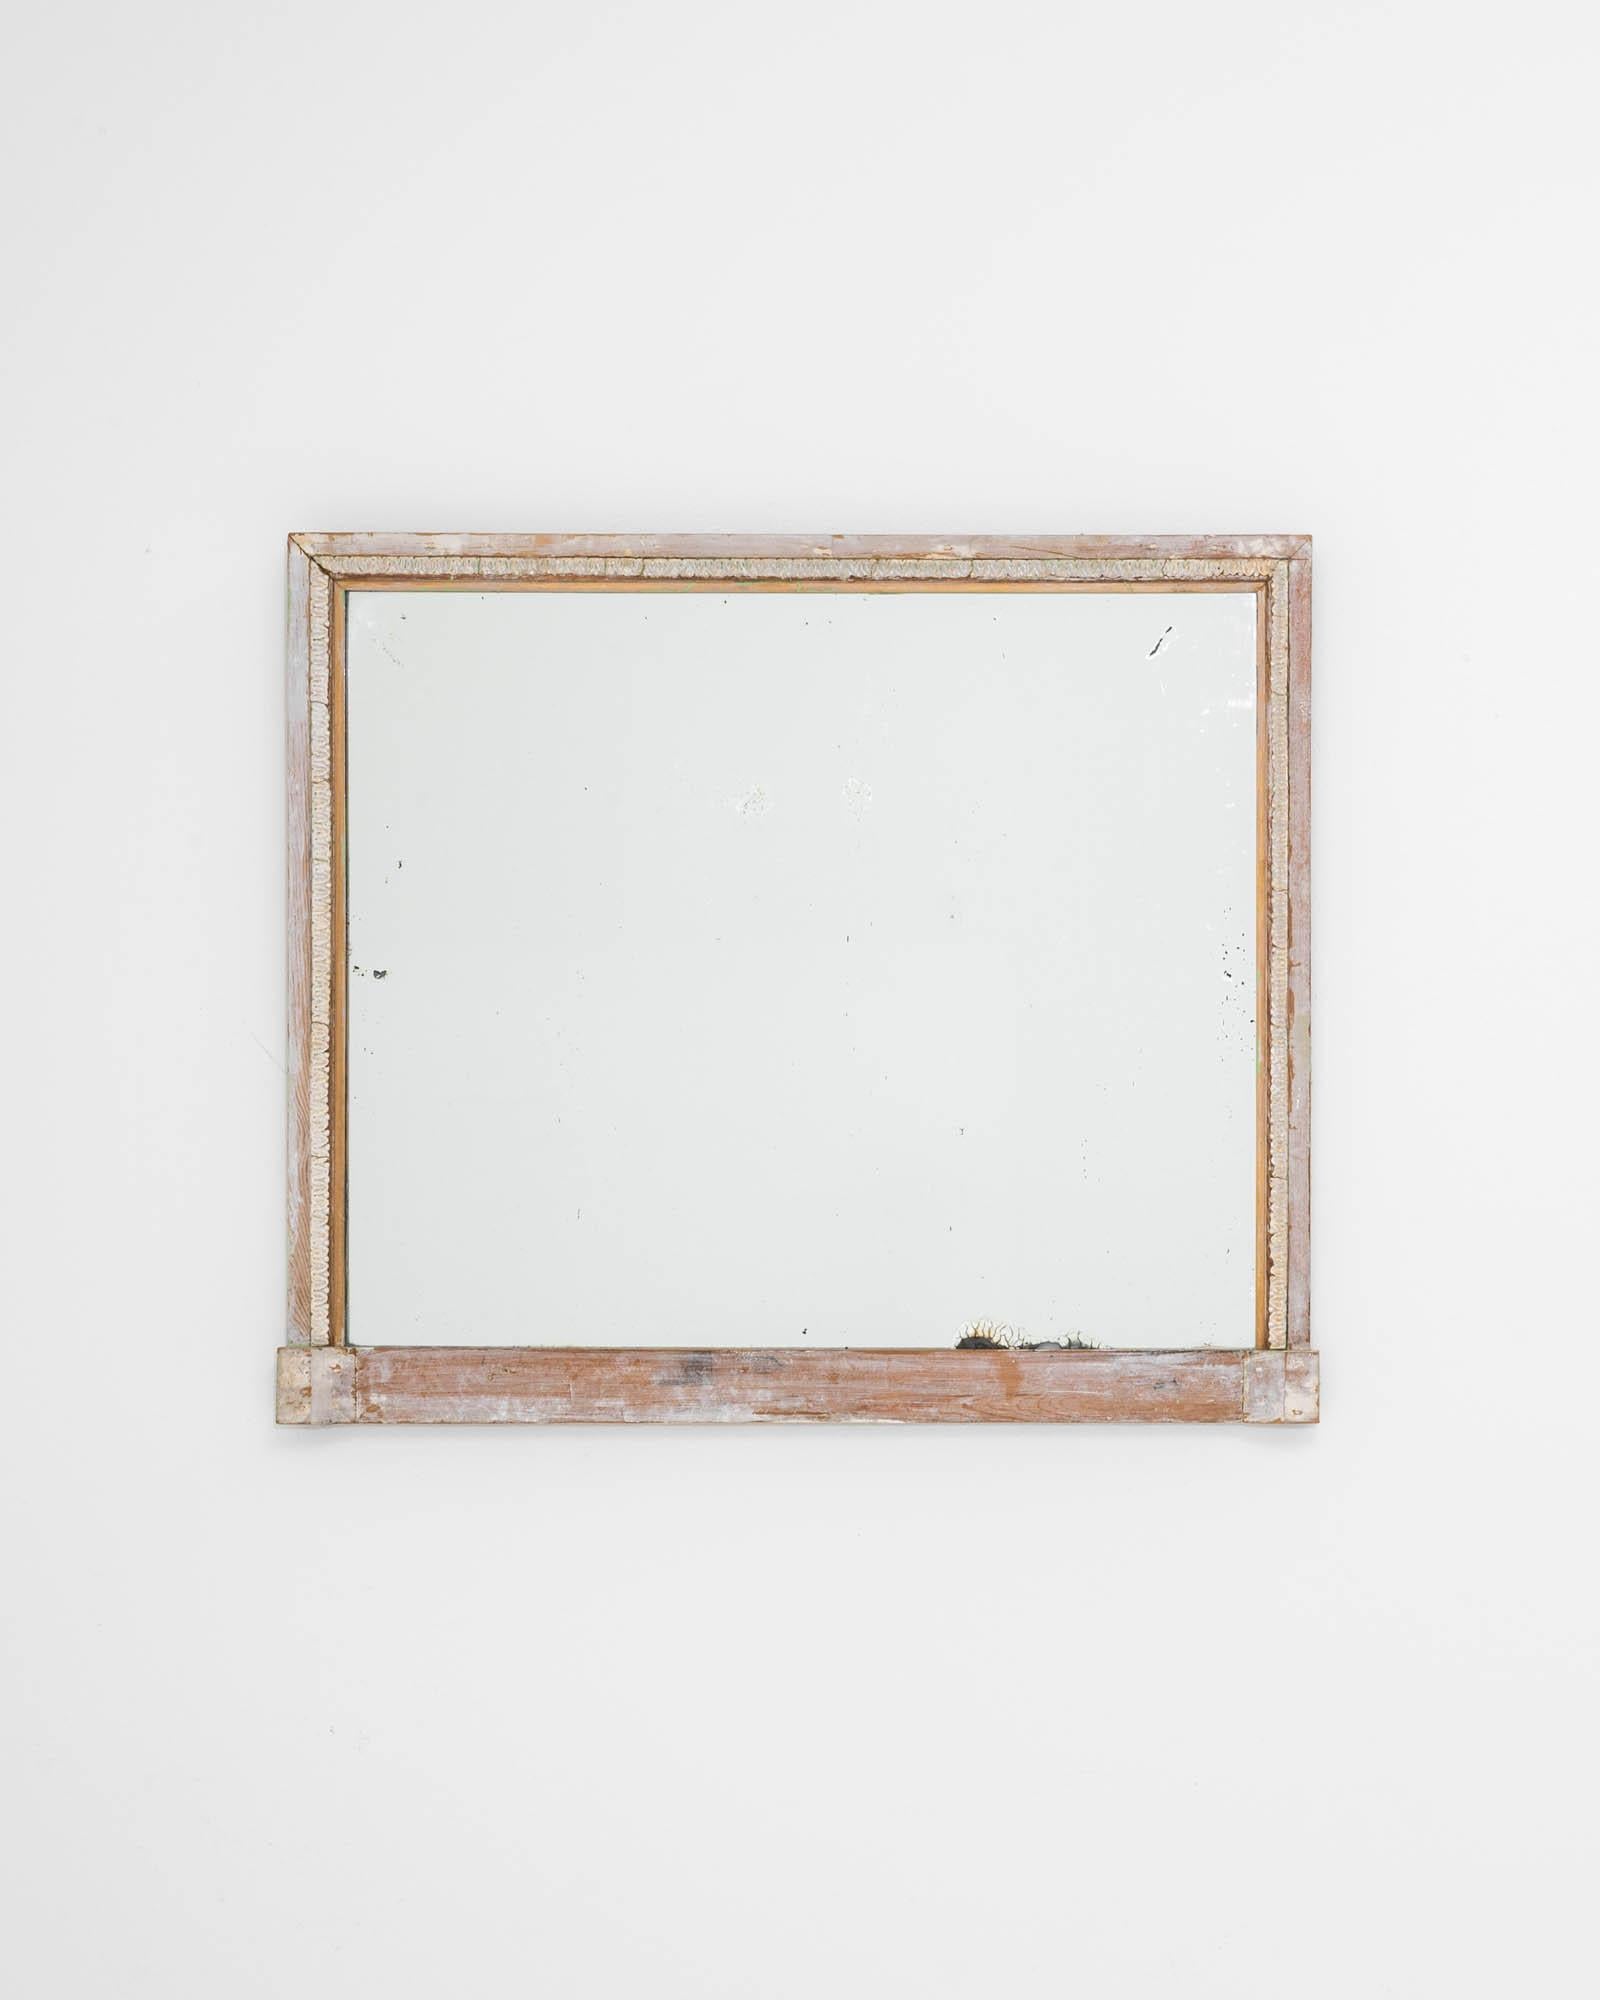 A wooden mirror created in 19th century France. Composed with an upright shape, a laurel of ornament crowns the top and sides of this timeless find. The white patina has been enhanced by time, drawing one in for a closer inspection. Classical motifs